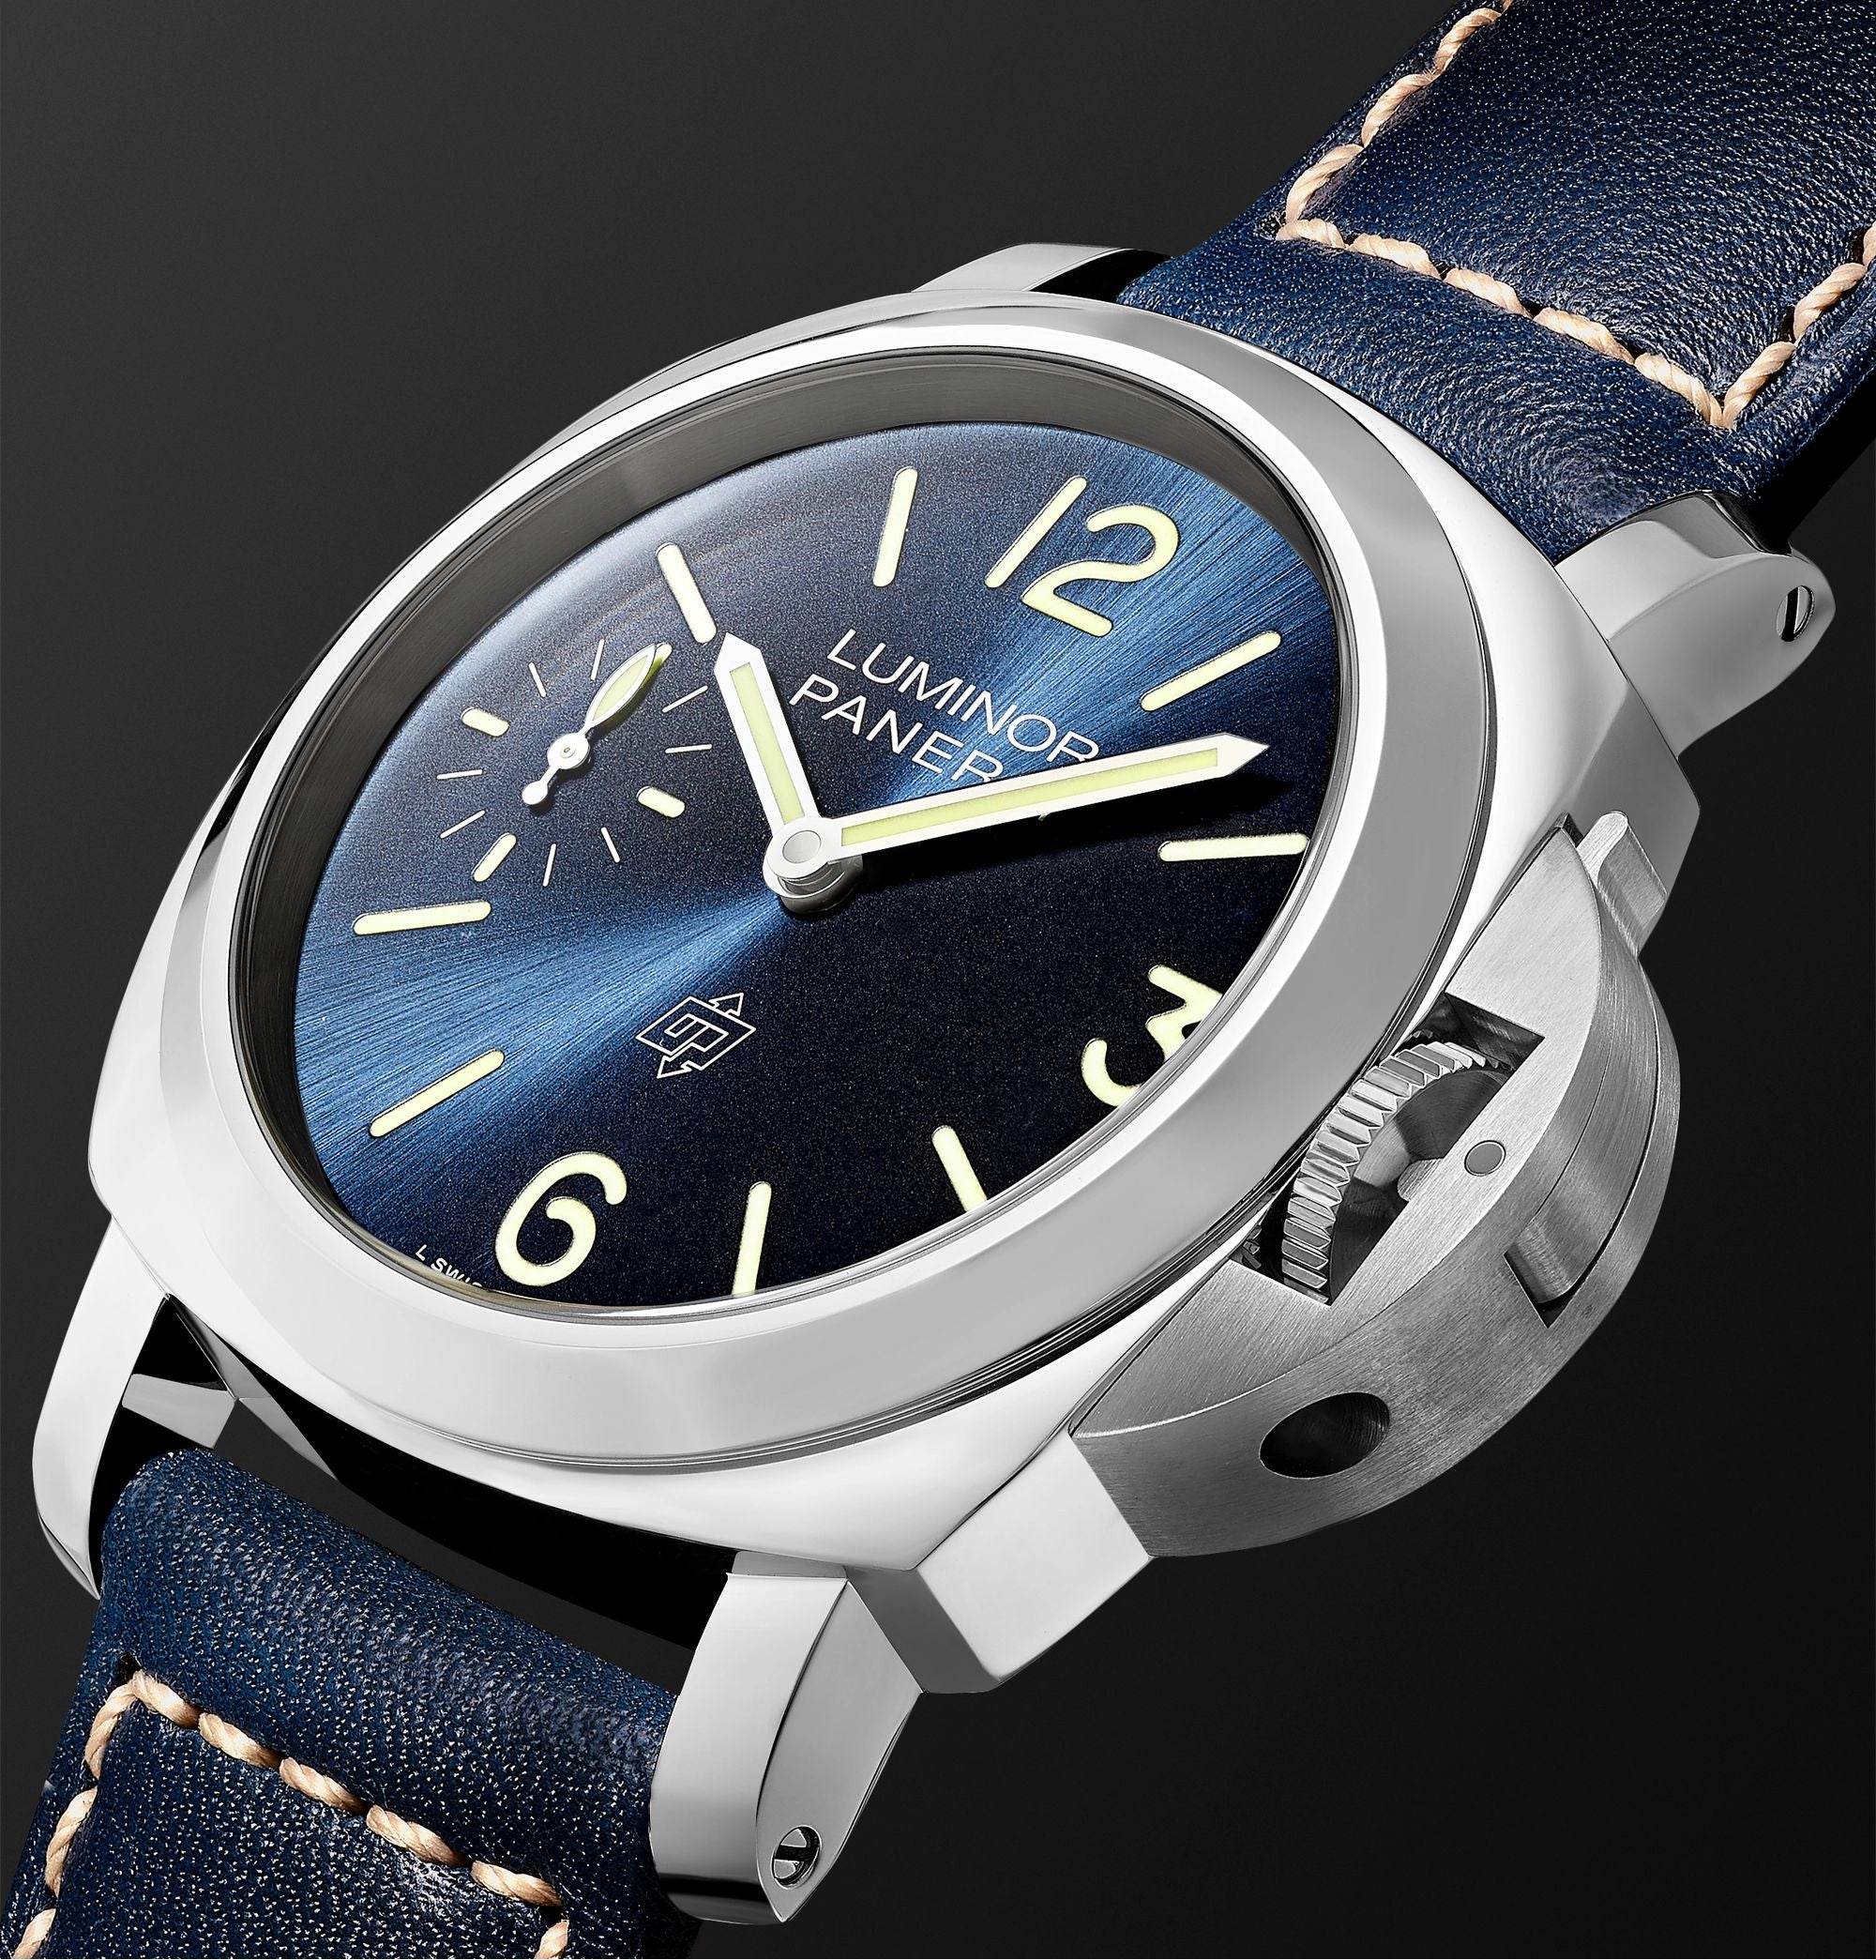 Luminor Blu Mare Hand-Wound 44mm Stainless Steel and Leather Watch